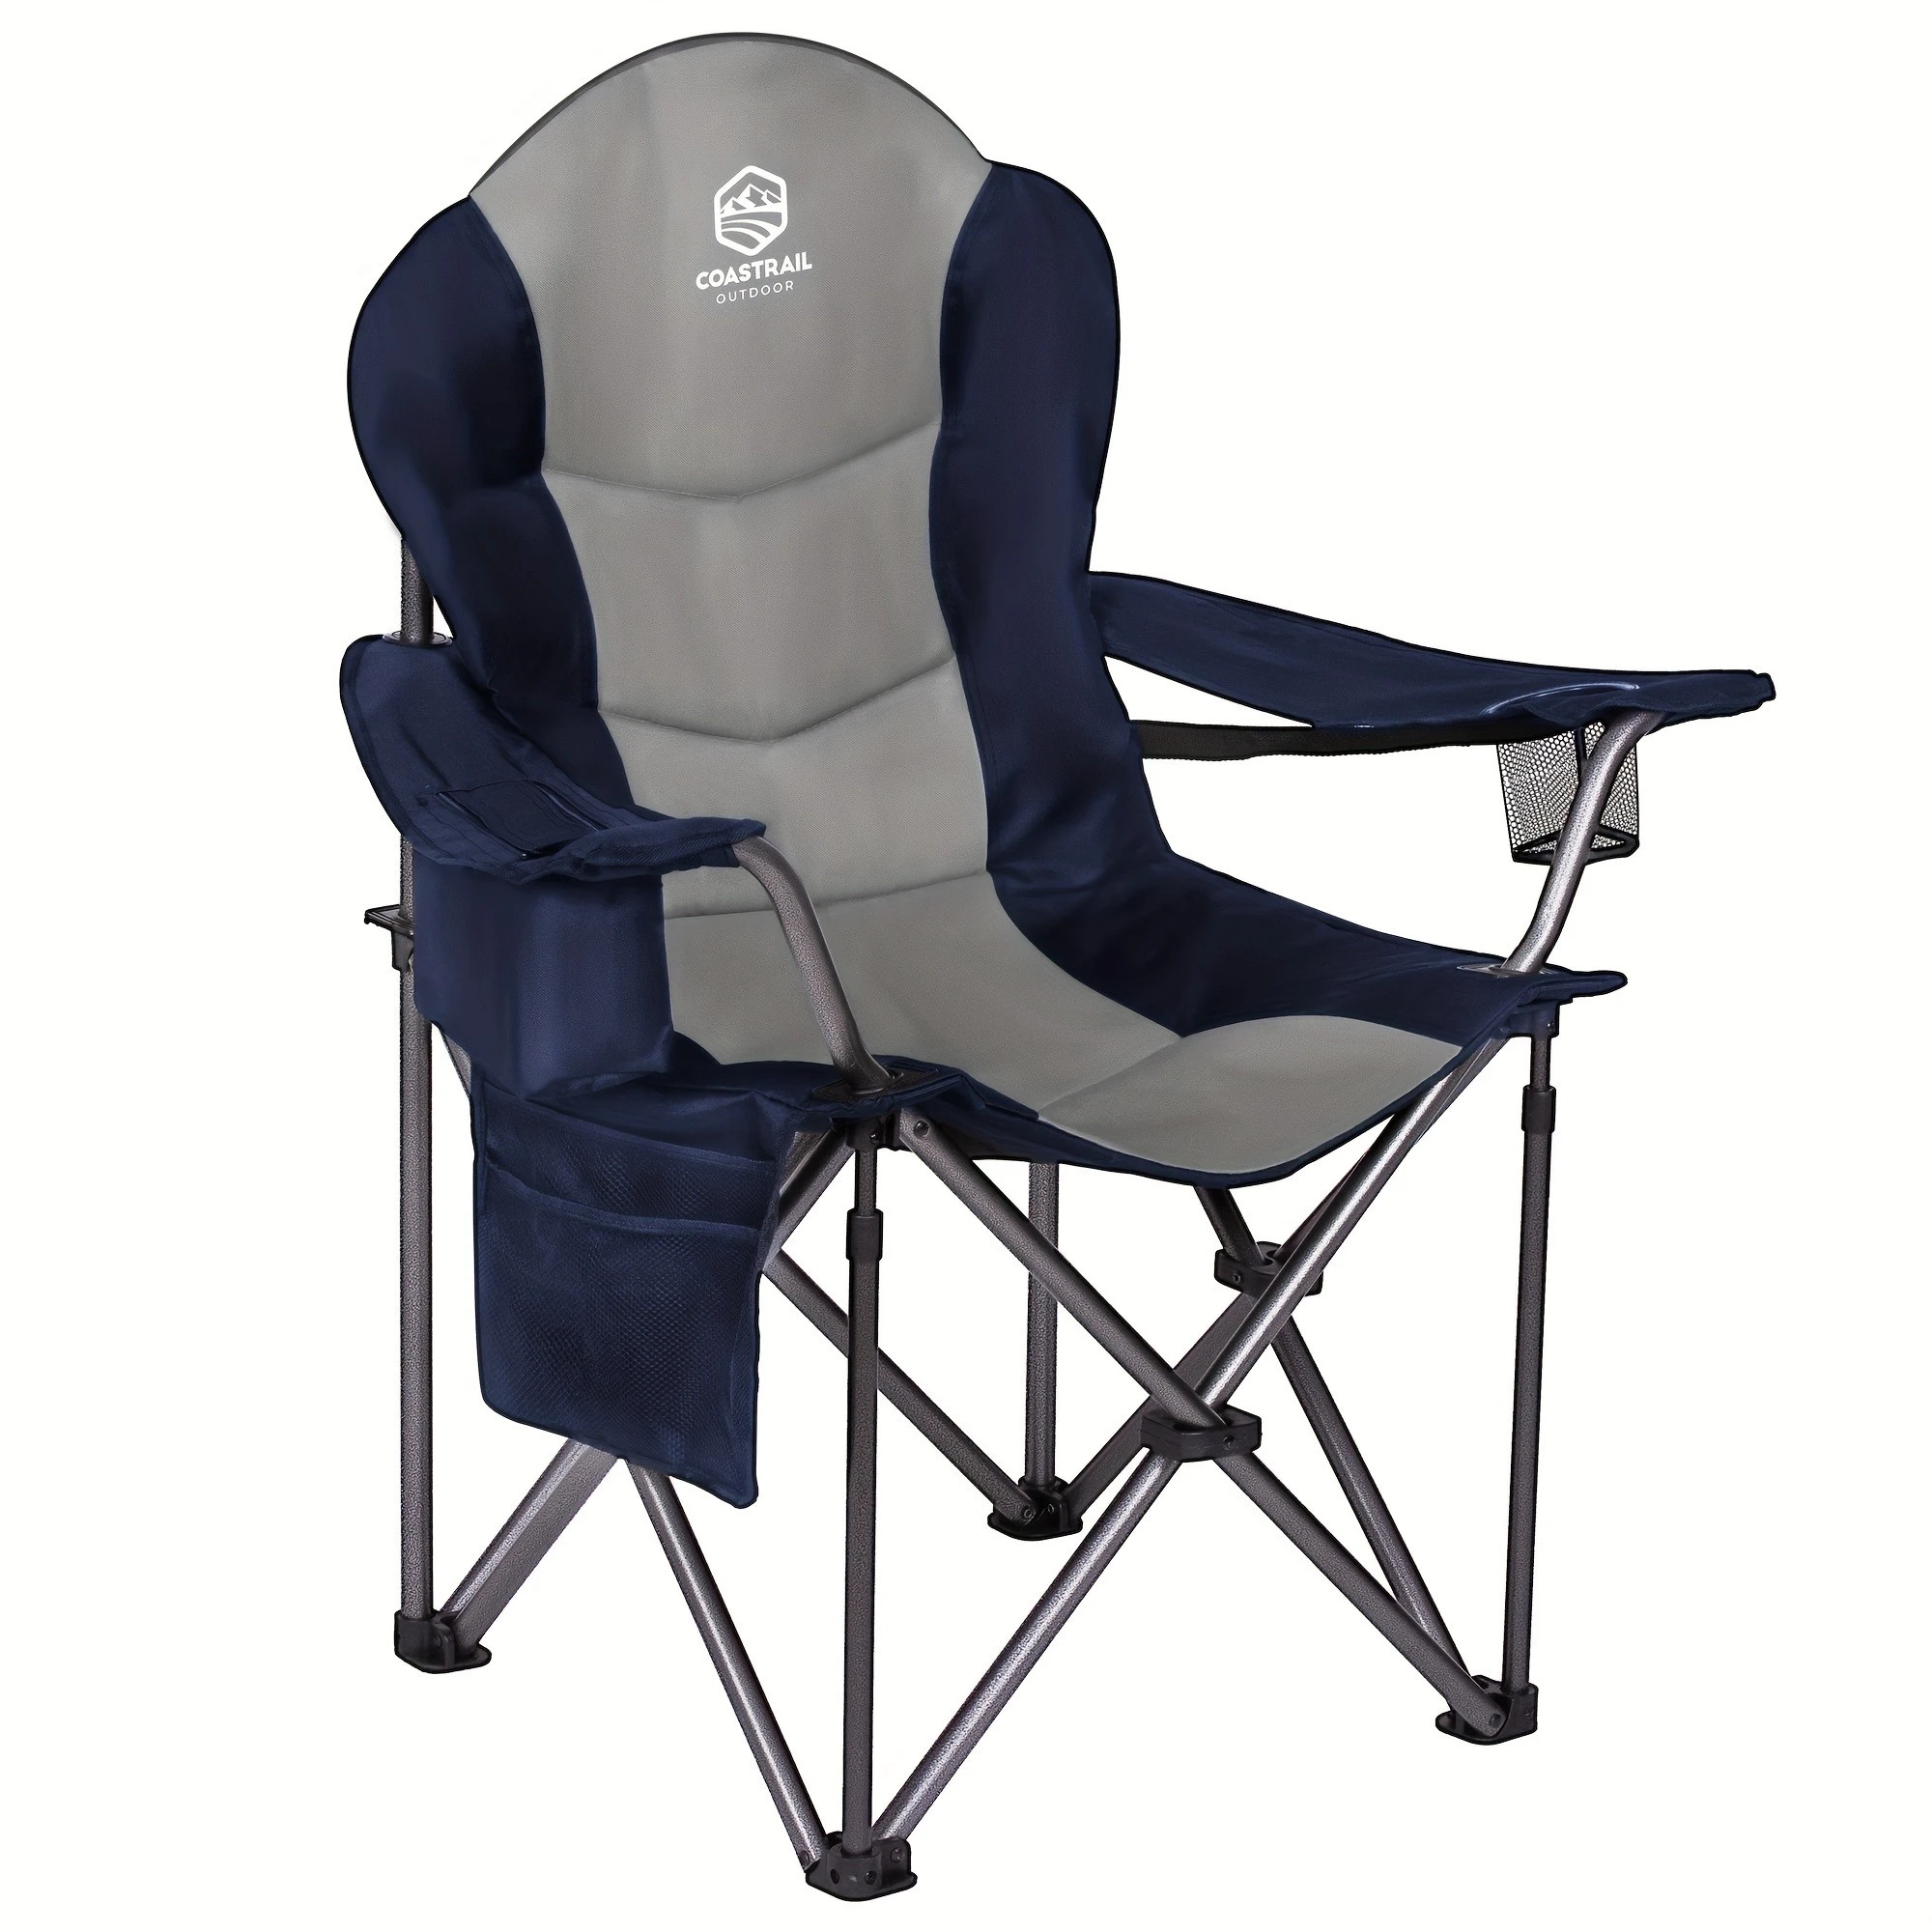 

Outdoor camping is convenient to carry with multiple capacity folding chairs